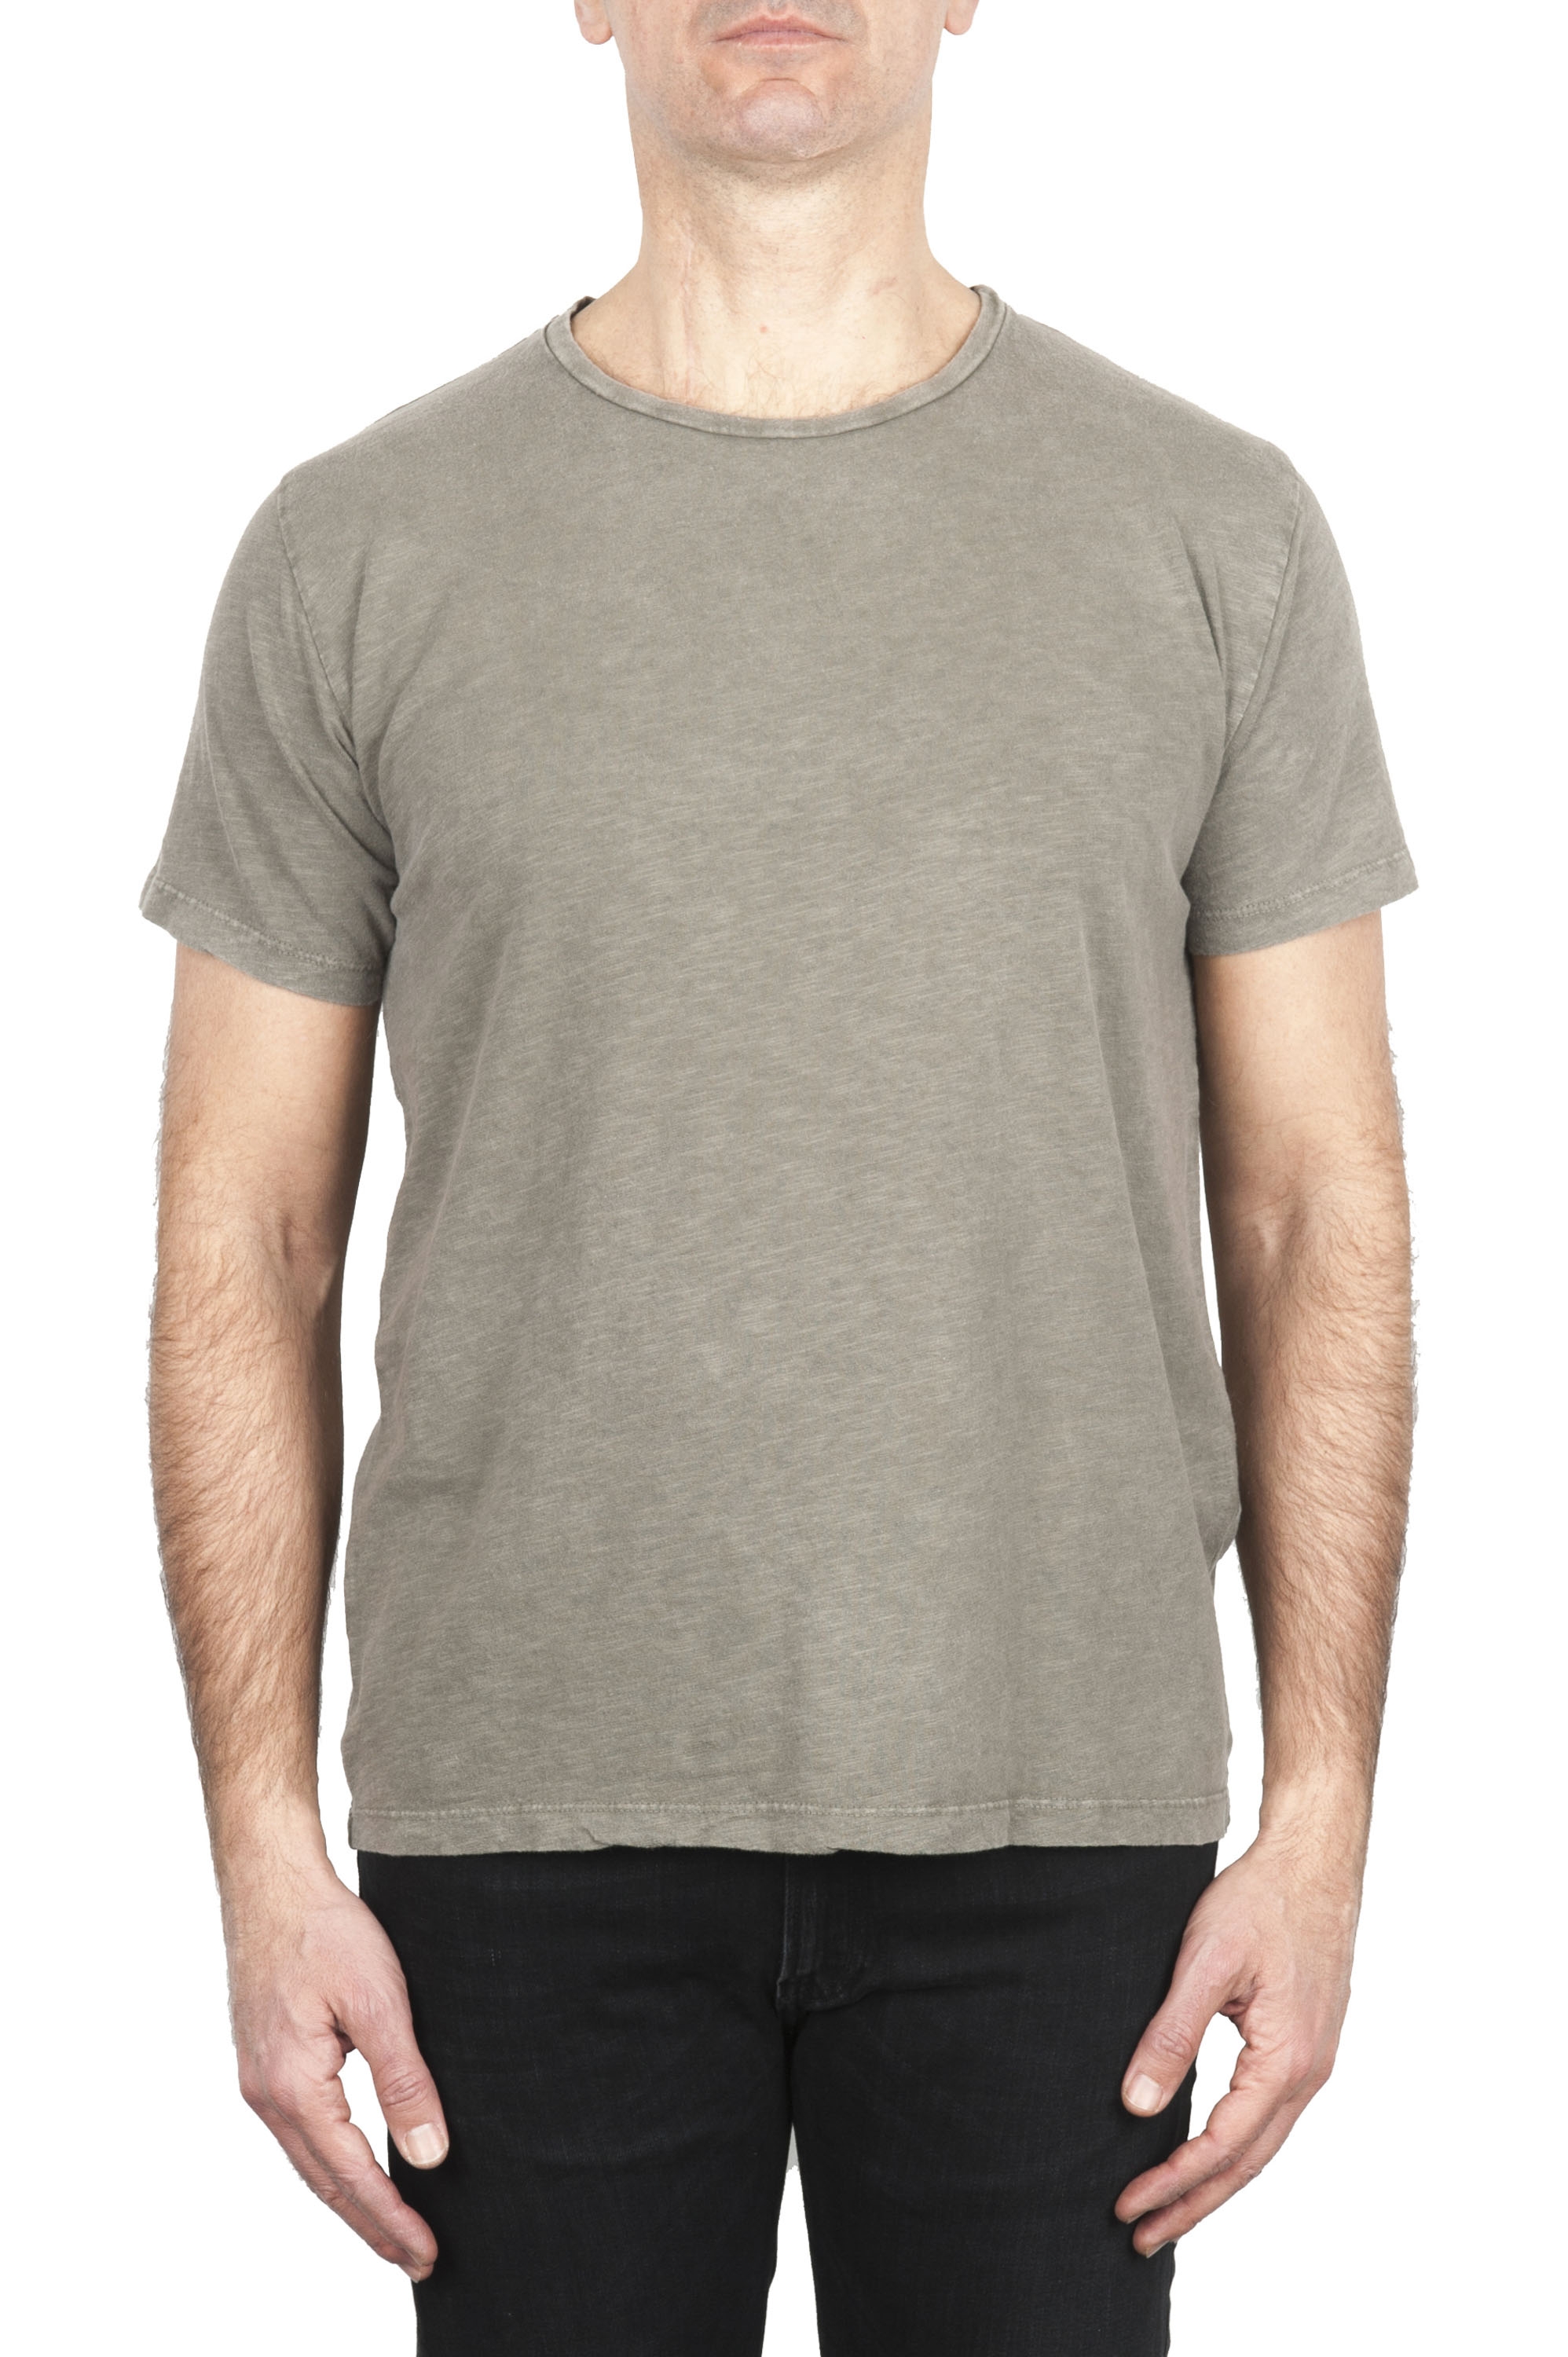 SBU 03070_2020AW Flamed cotton scoop neck t-shirt olive green 01